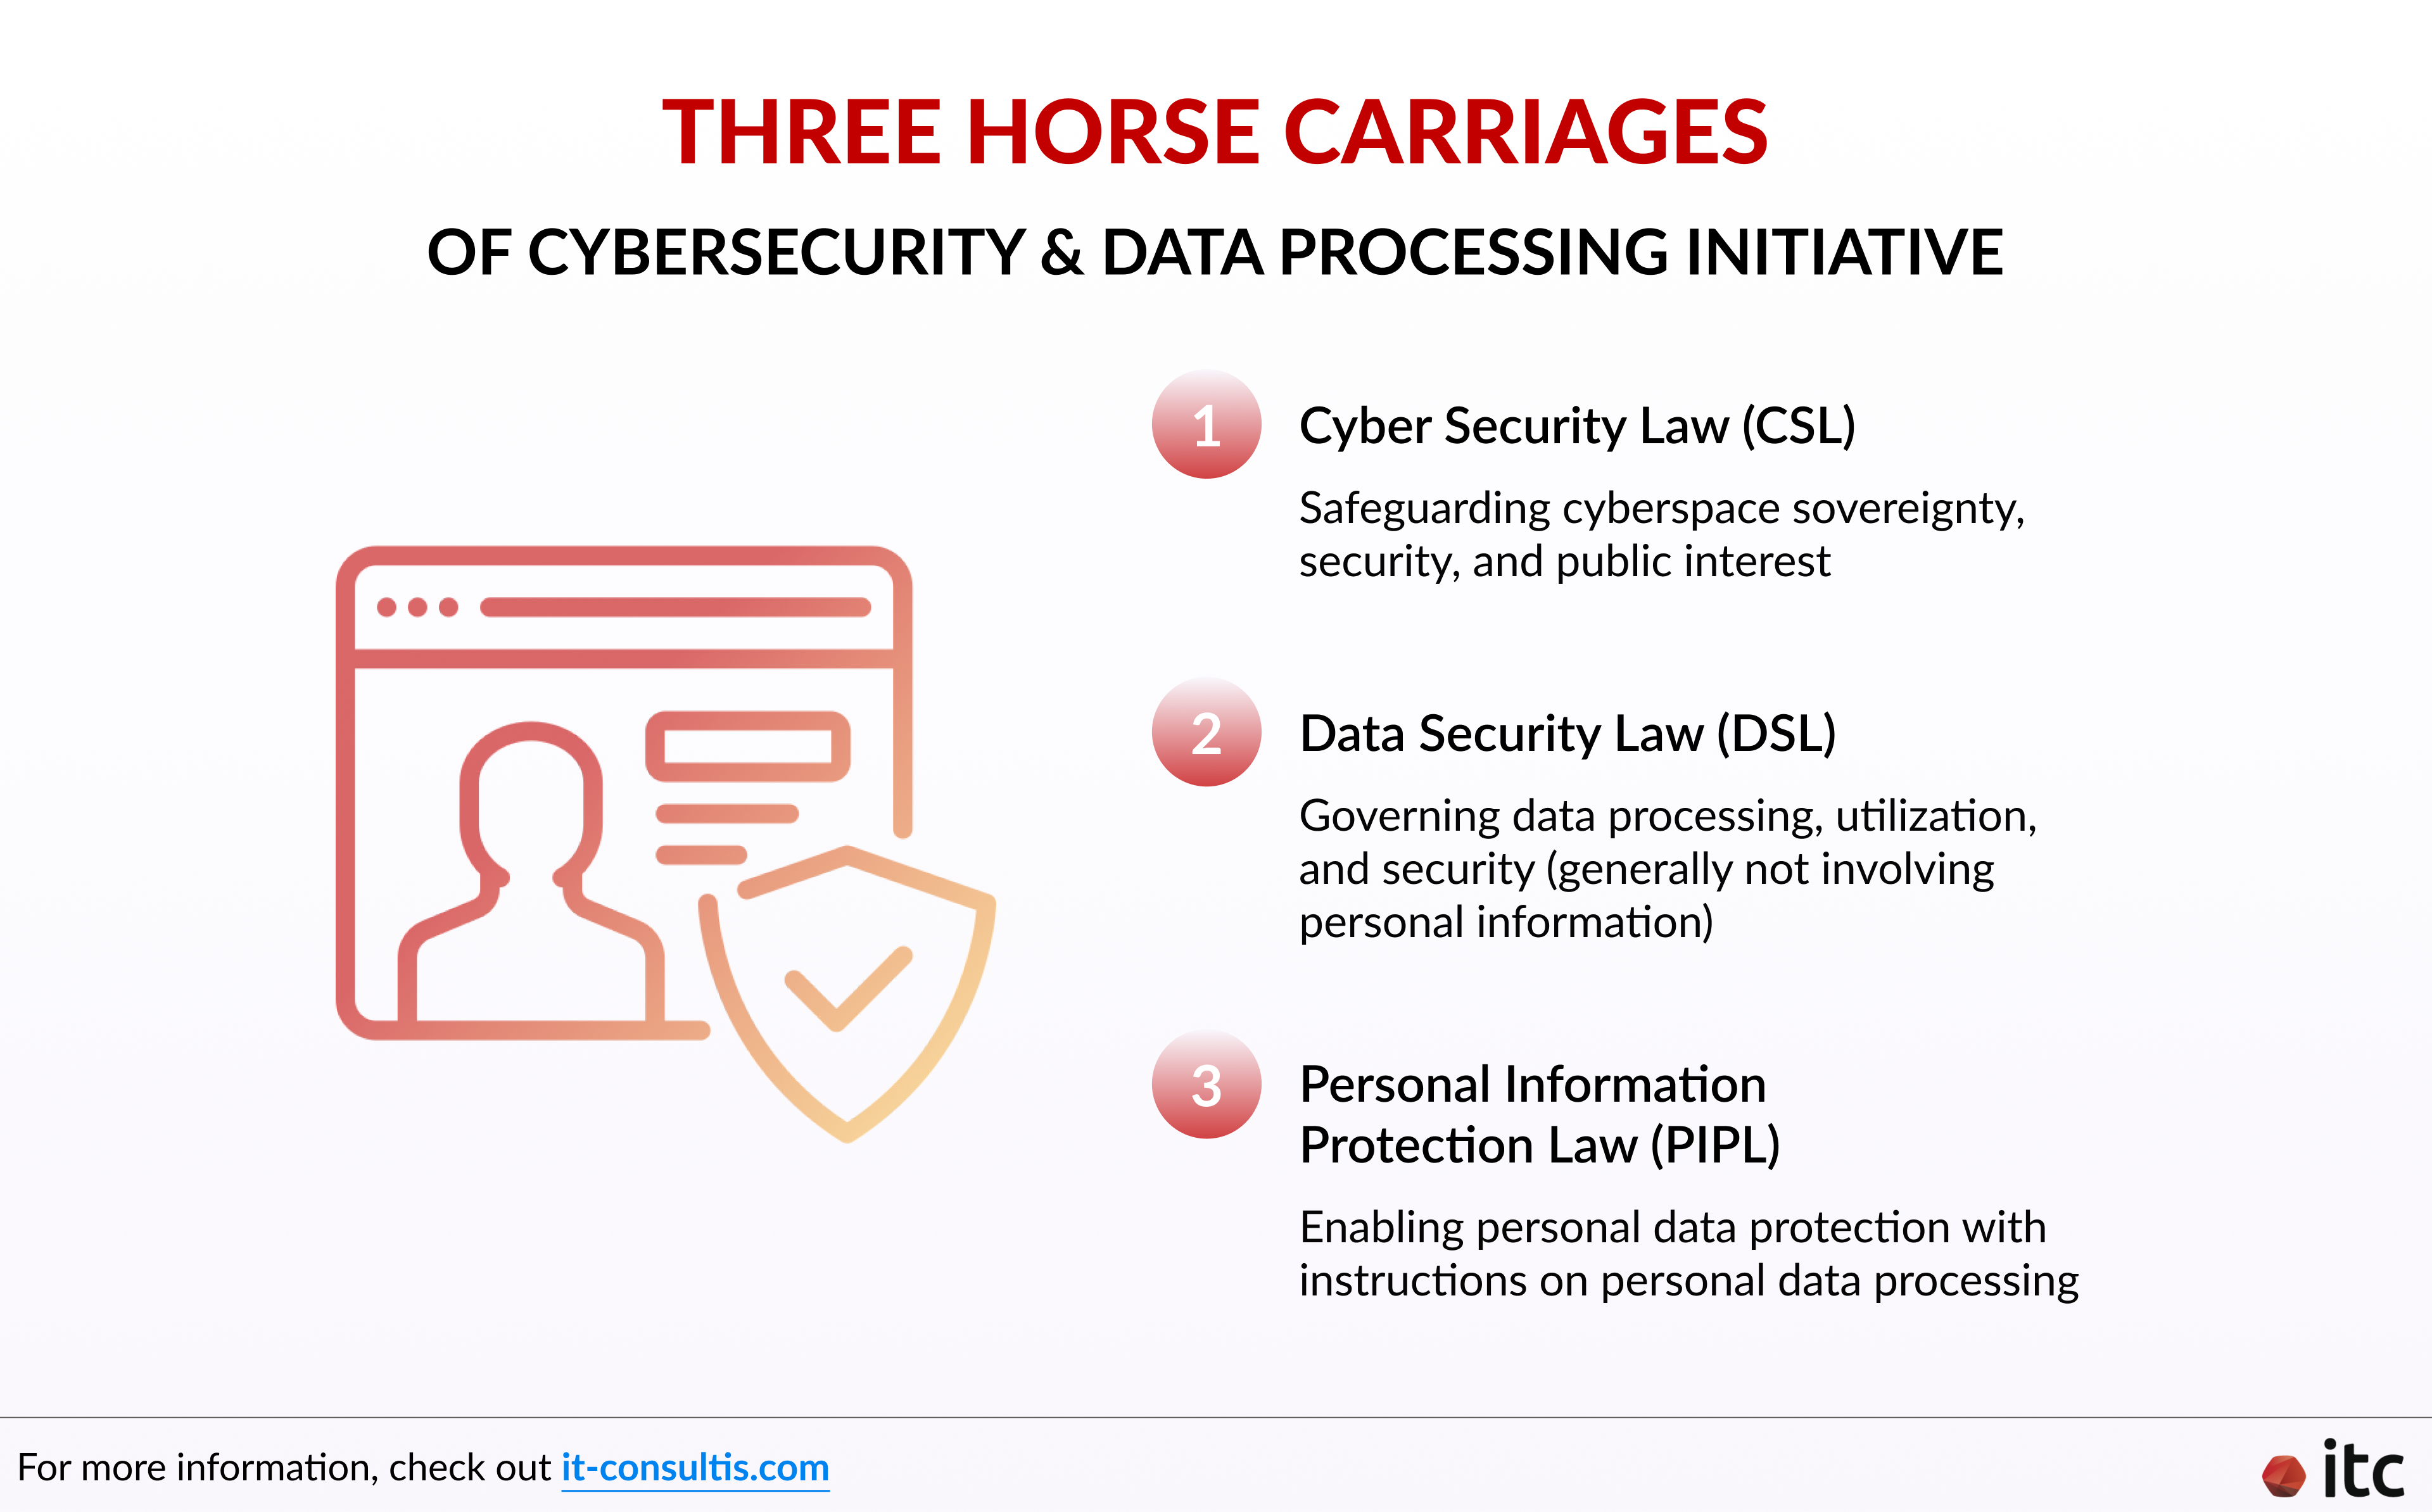 The three horse carriages of cybersecurity and data processing initiative in China consist of the Cyber Security Law (CSL), the Data Security Law (DSL), and the Personal Information Protection Law (PIPL)